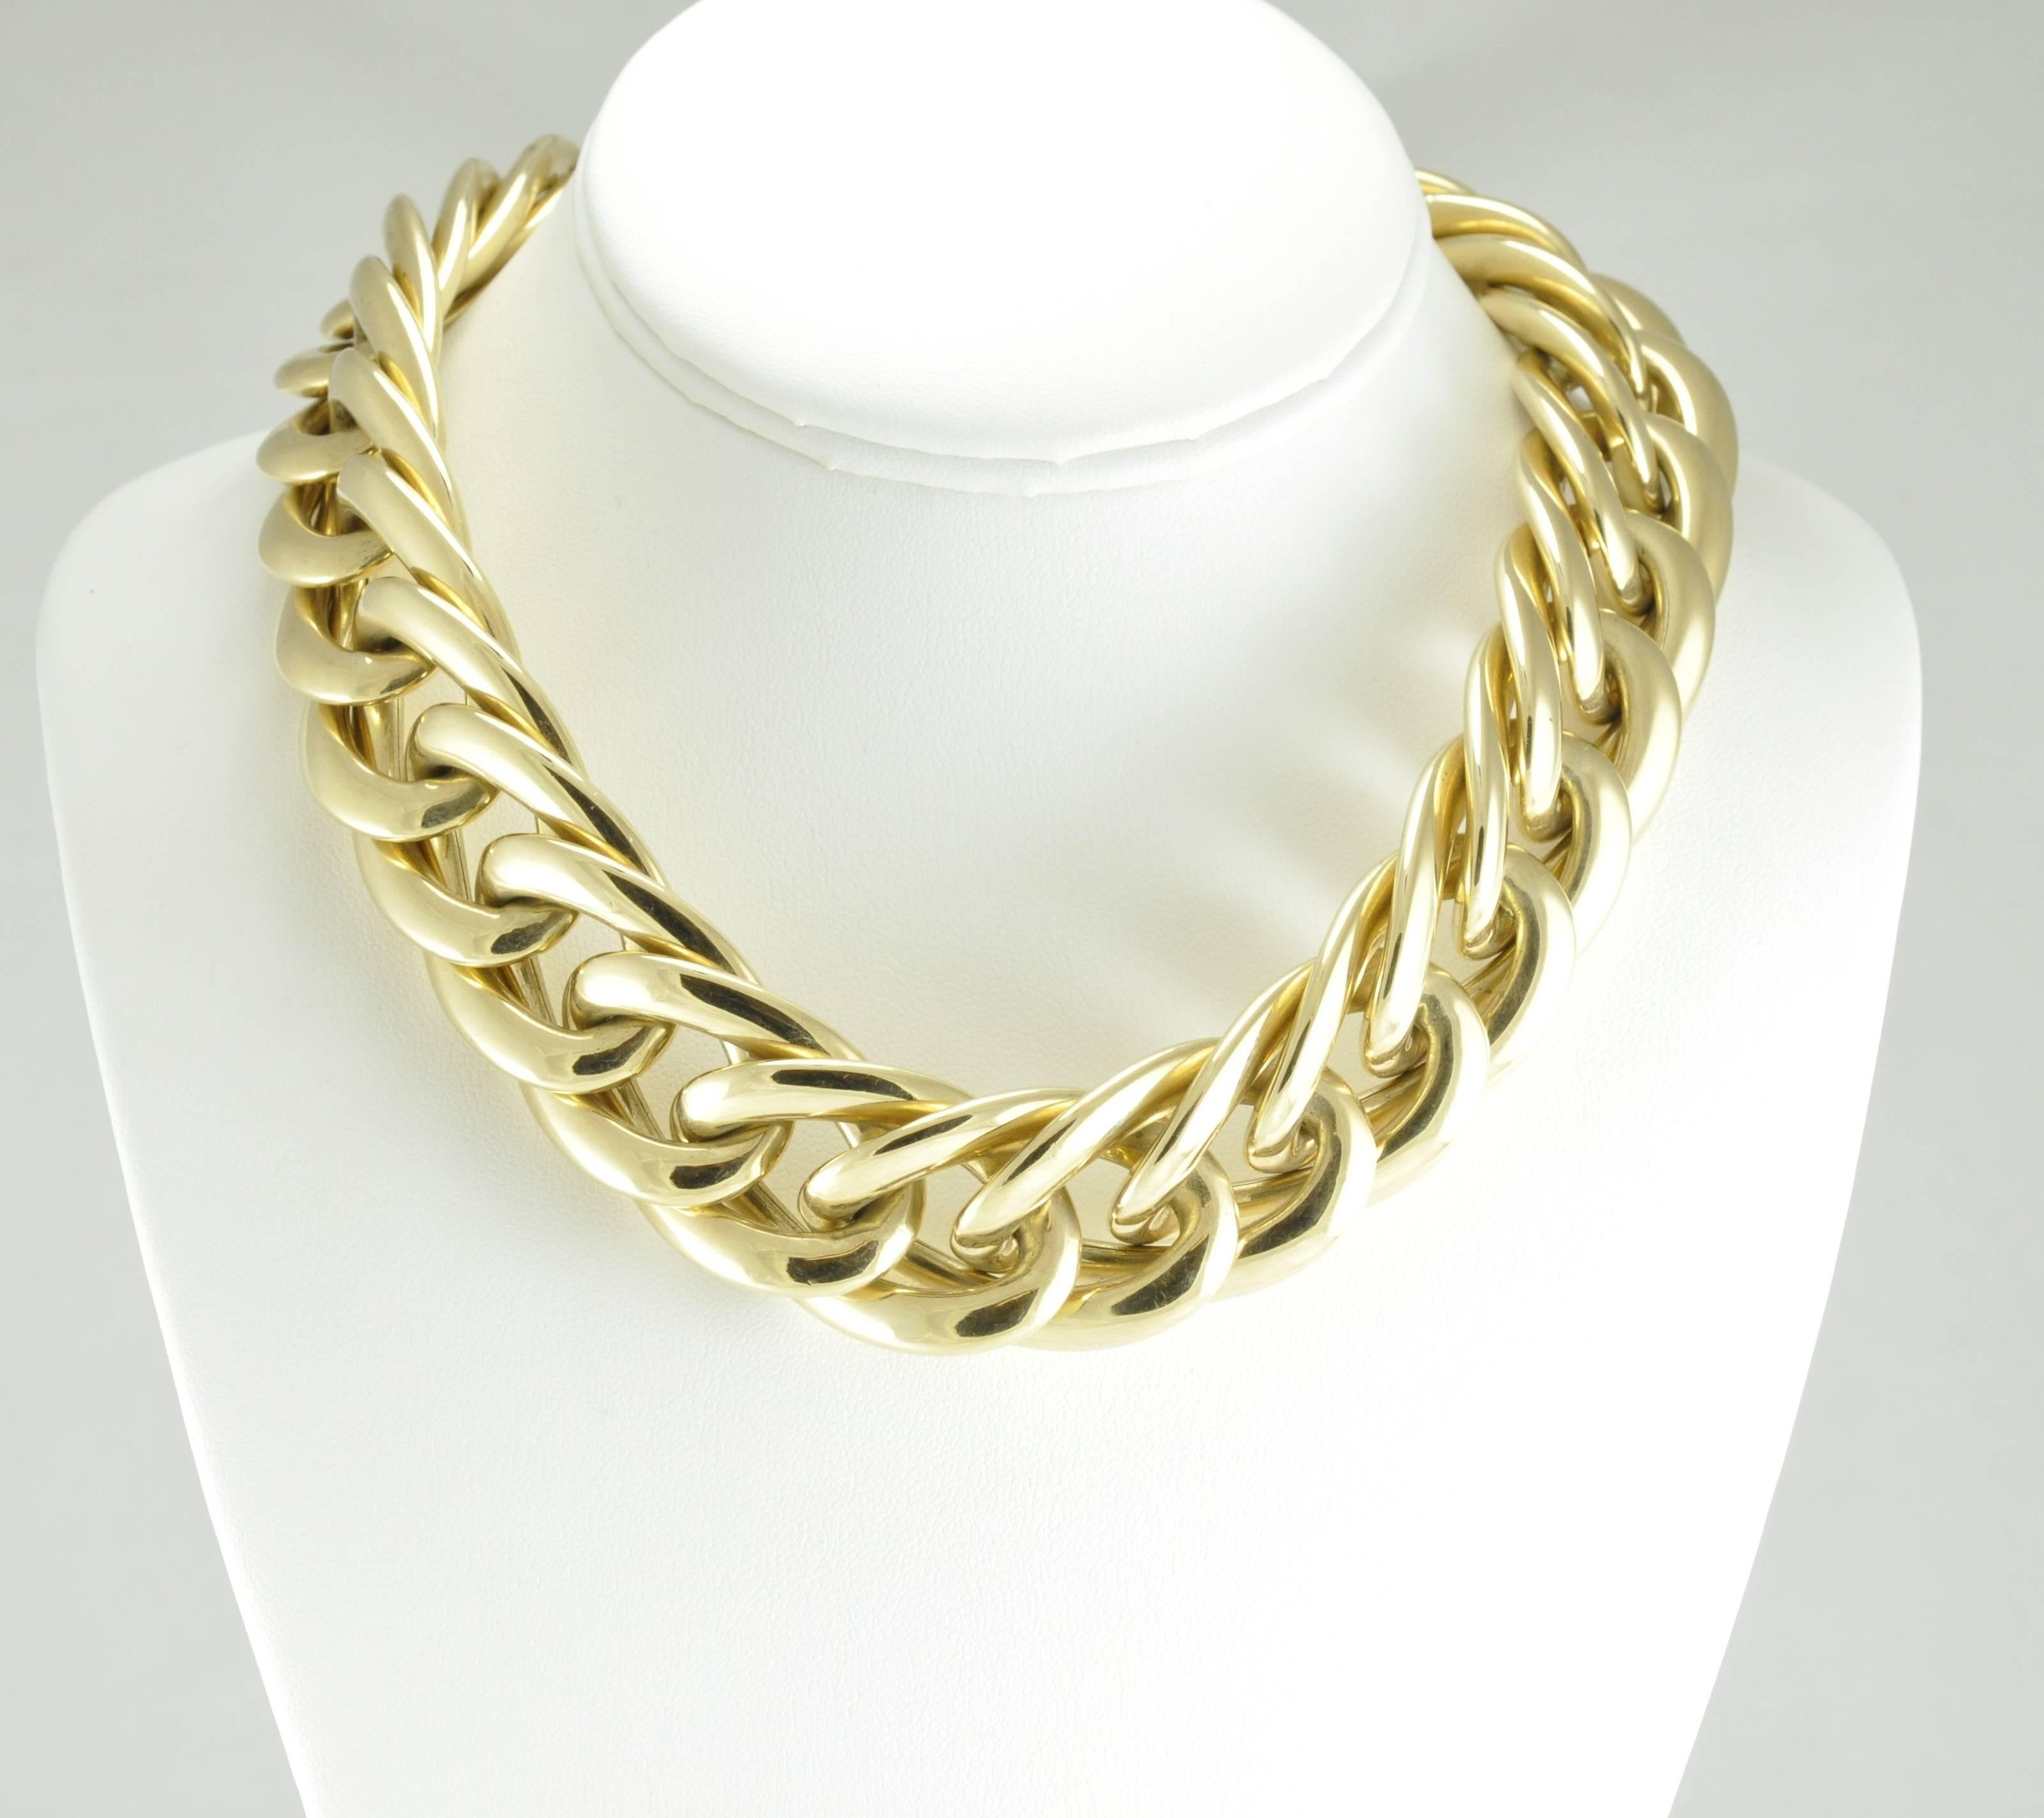 14k Yellow Gold Stamped 14k inch, Wide Link Necklace. Each link measures 1 inch wide and 1.5 inches long. The necklace has a double safety catch closure. The clasp is stamped ITALY and CI, however, the manufacturer is unknown.
As the links are